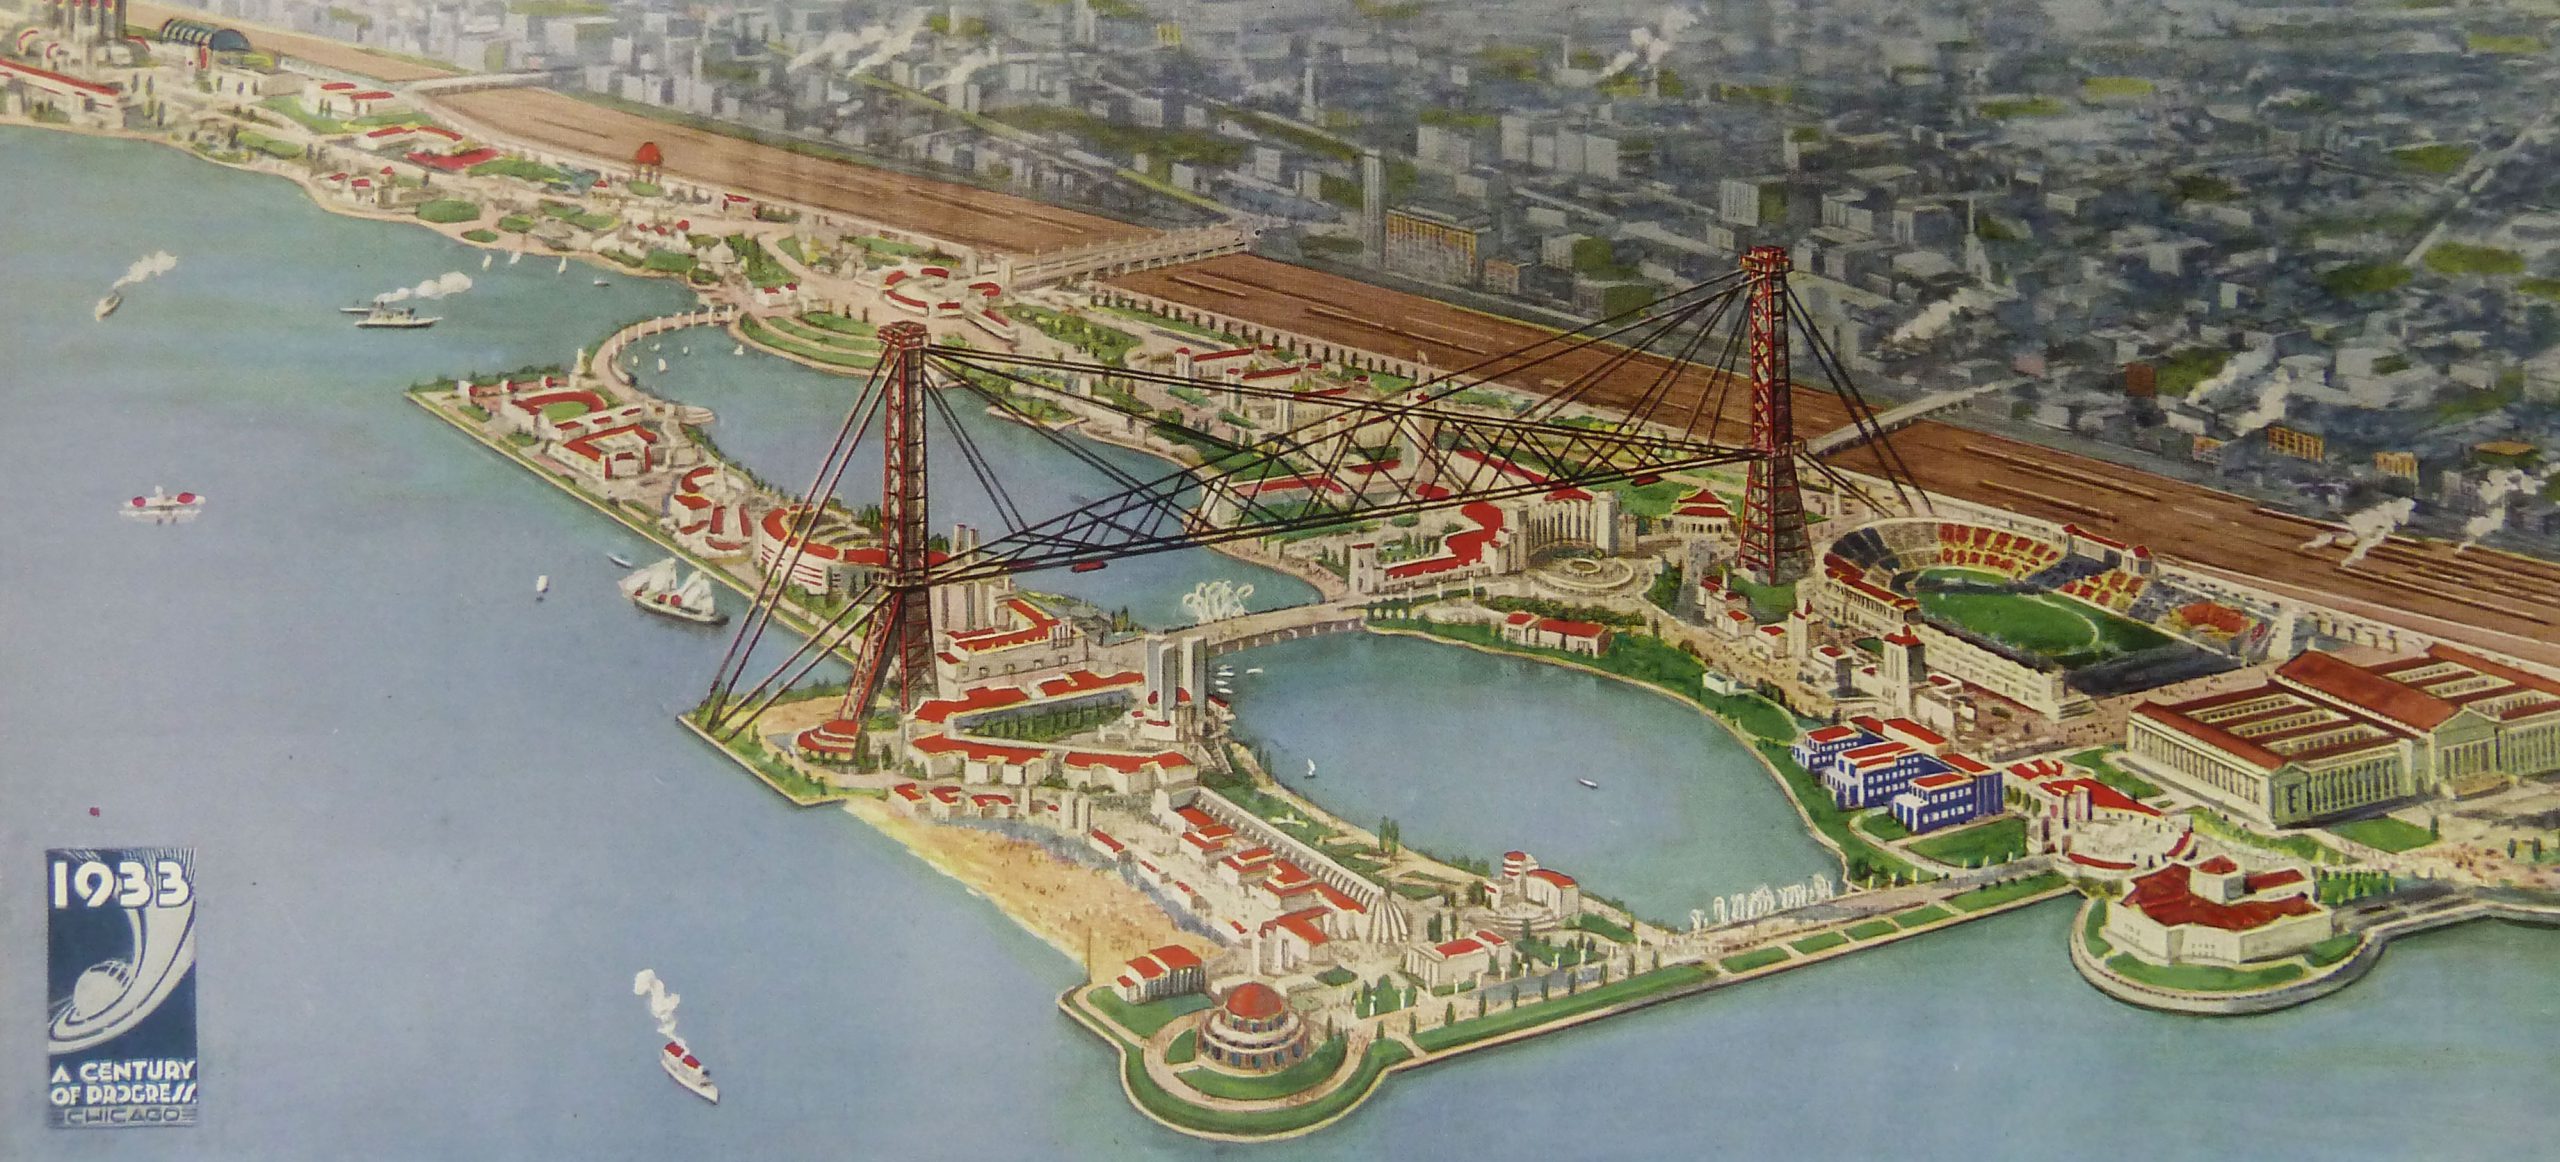 An exposition poster of an illustration depicting a coastline made up of a cityscape and a collection of pavilions, separated by a freeway. Towering above the pavilions is a bridge connecting the two stretches of land, holding an inlet. In the water are a number of boats. In the bottom left corner is a rectangle with the date “1933”, “A Century of Progress”, and “Chicago” written in it.